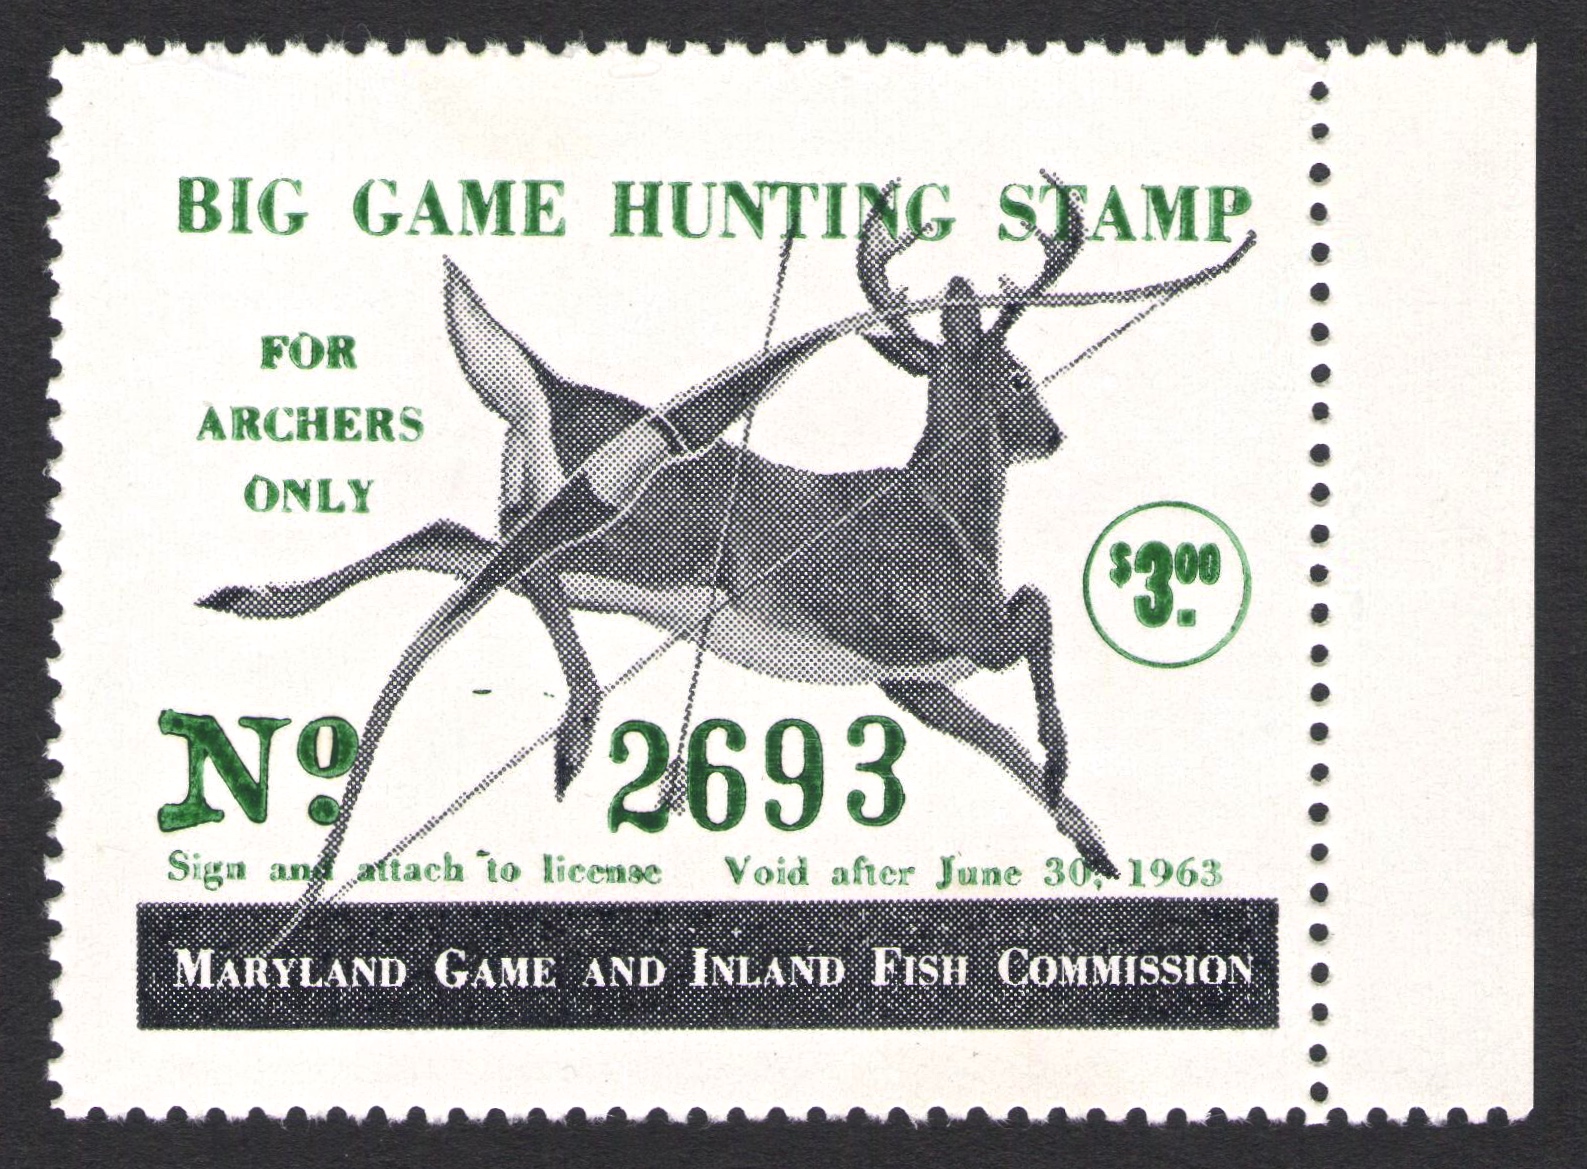 1962-63 Maryland Big Game for Archers